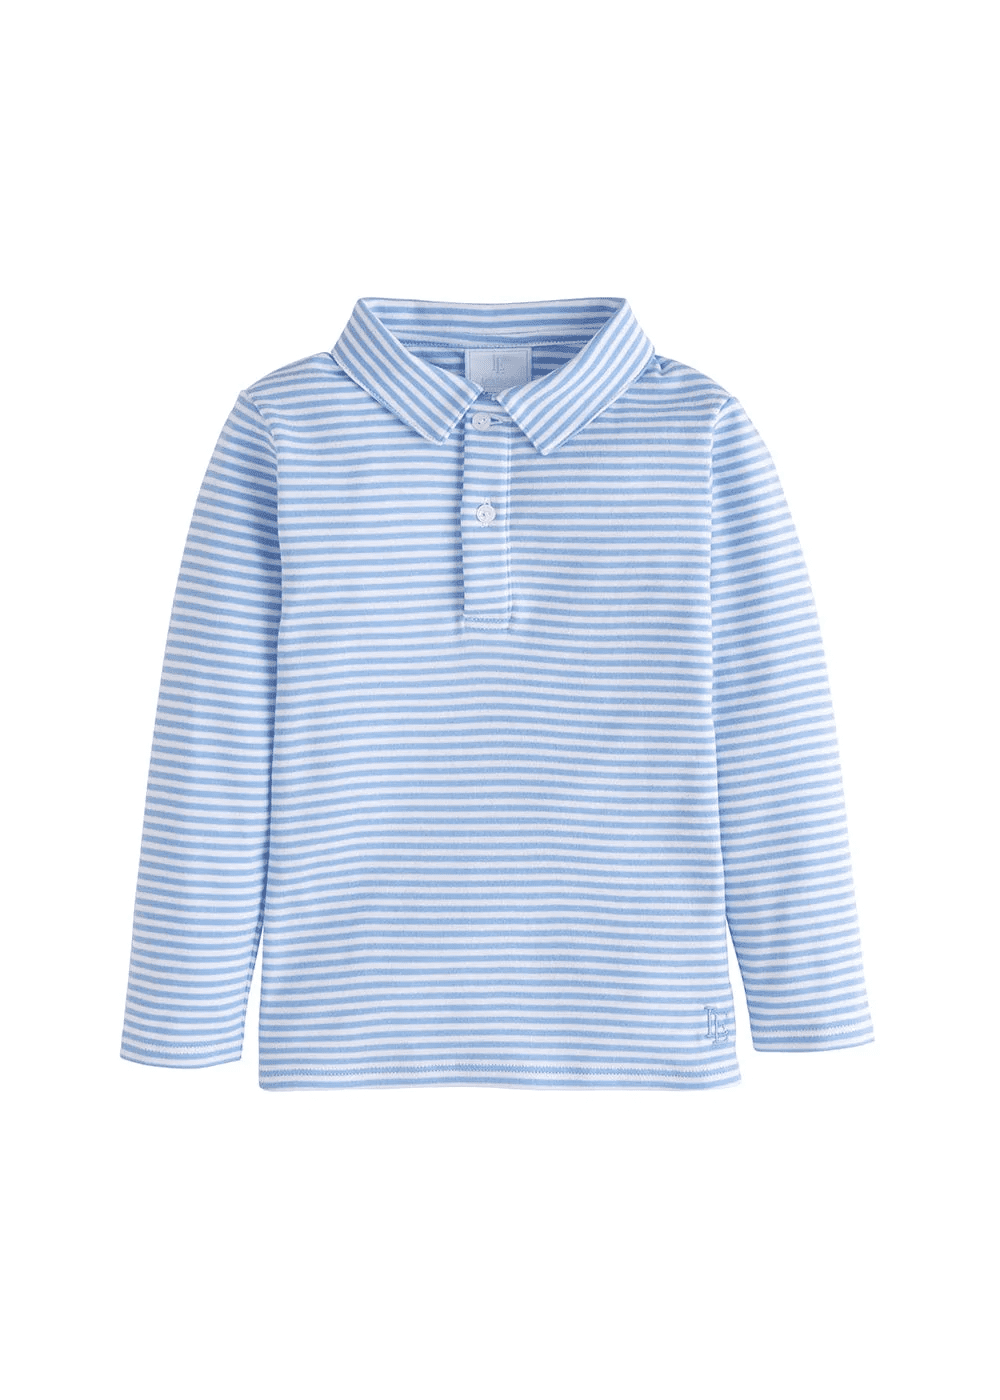 Boys Striped Polo from Little English